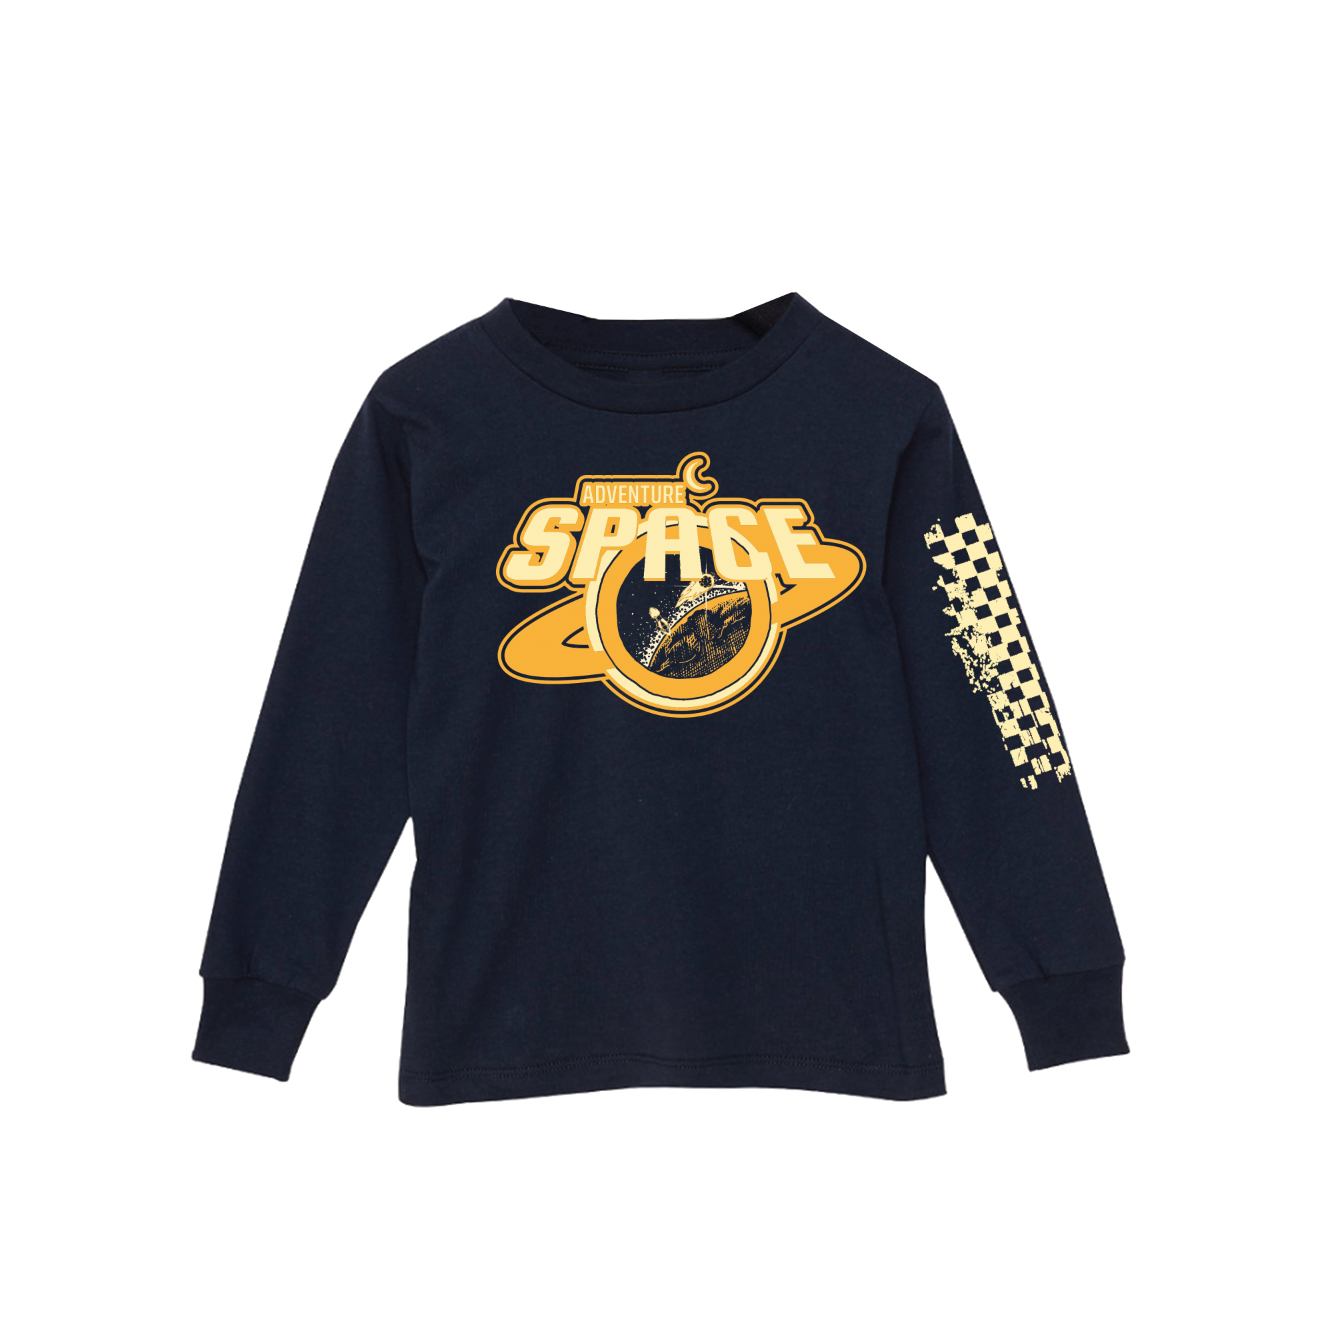 Space Adventure Black Long Sleeve - Unisex for Boys and Girls